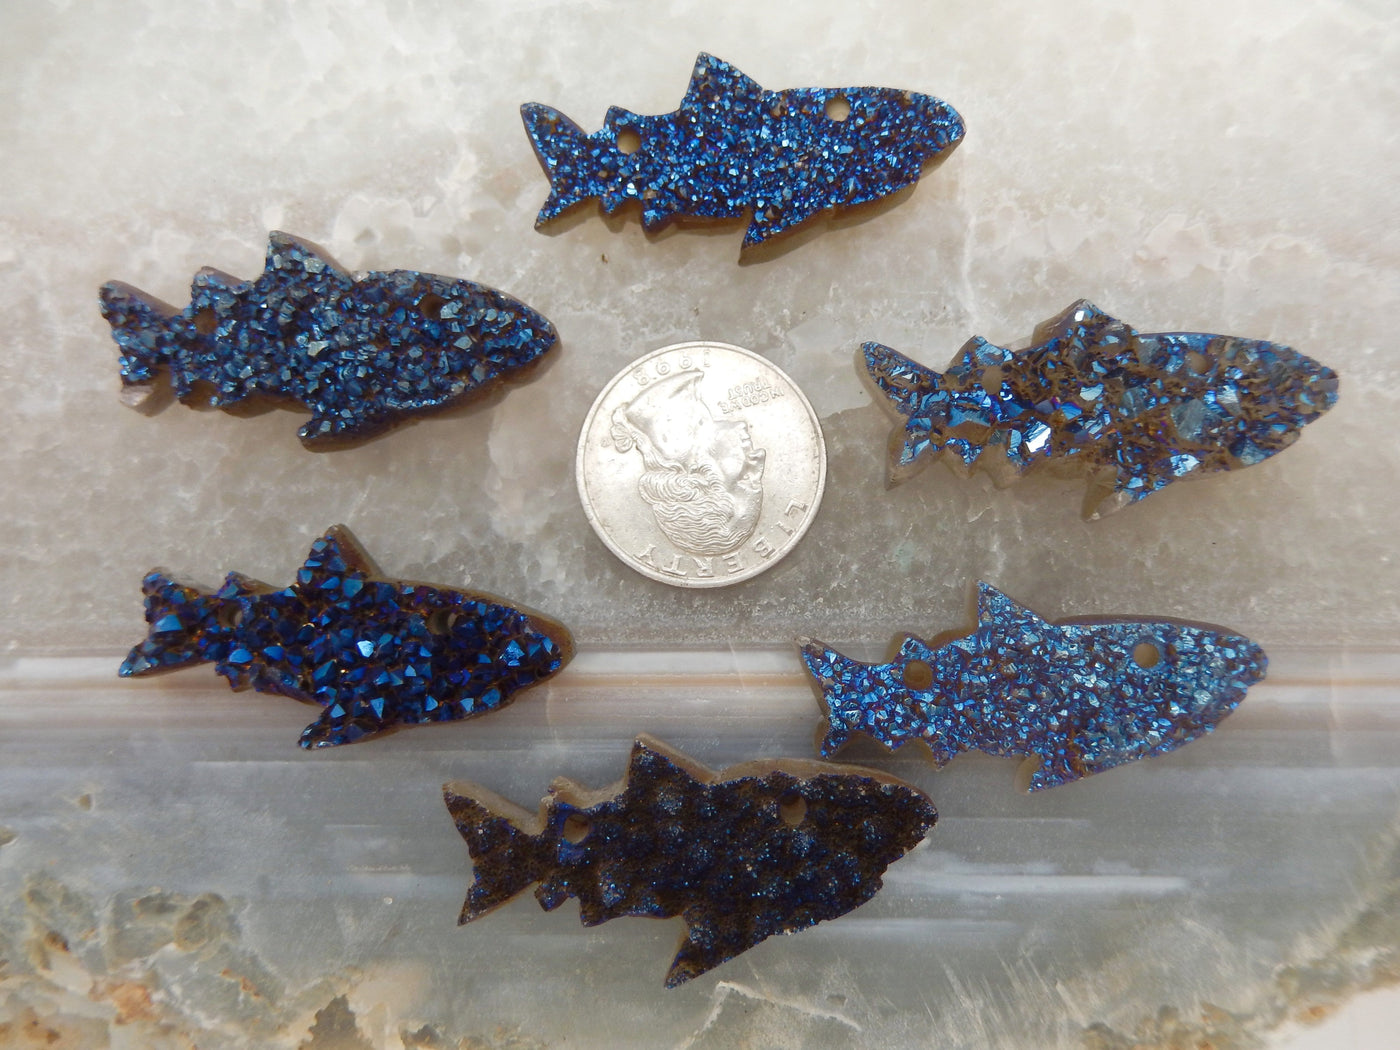 6 Mystic Blue Shark Fish Cluster Cabochons surrounding a quarter for size reference